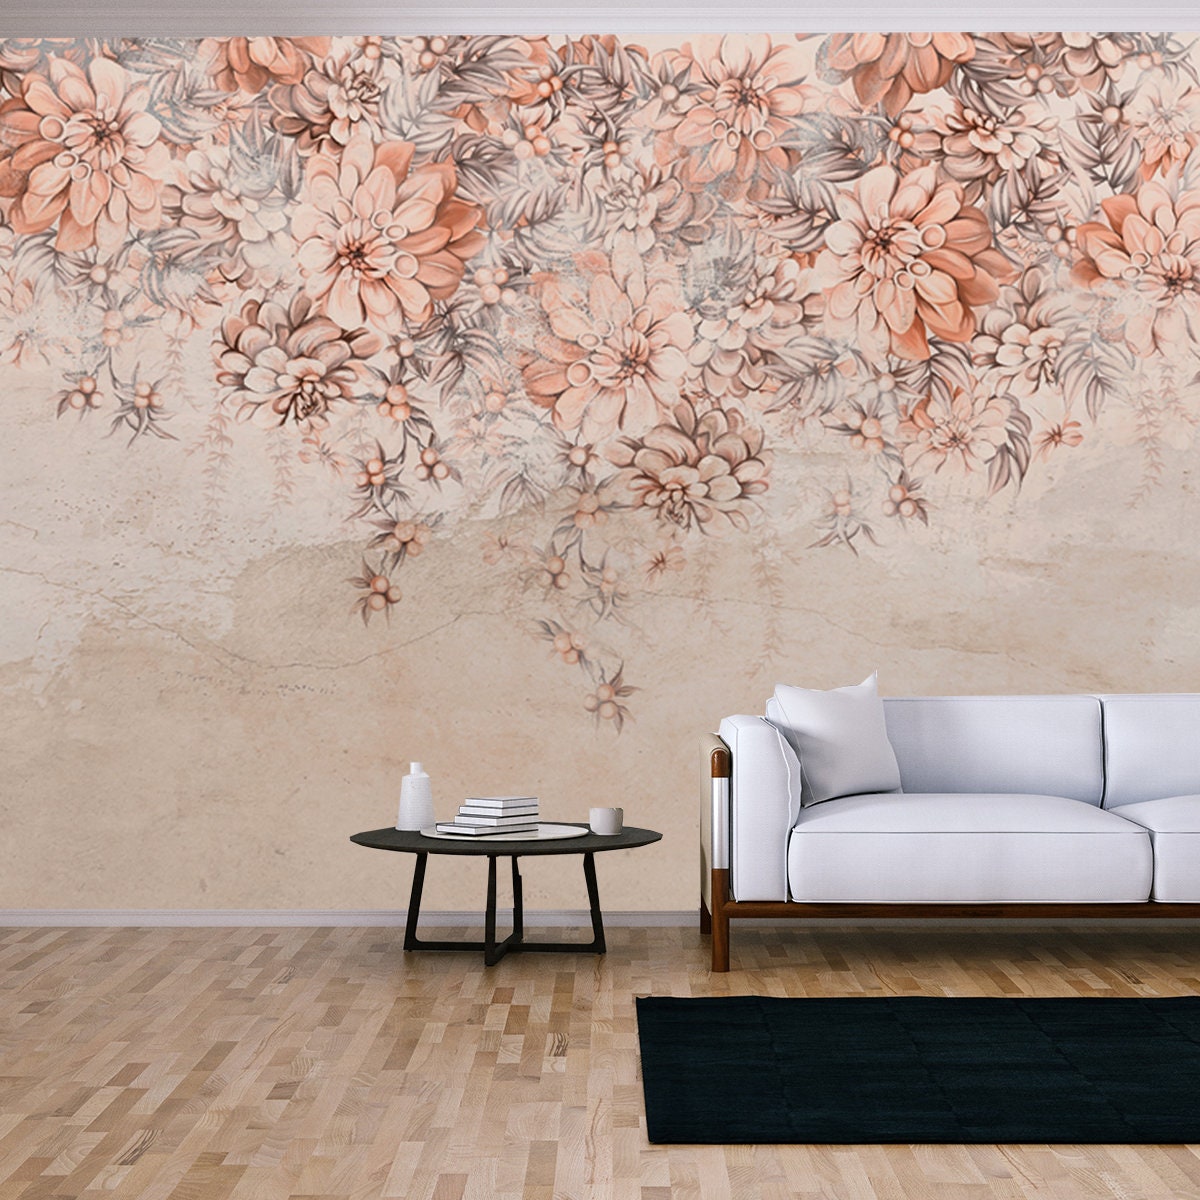 Large Flower Buds Art Drawn that Hangs Down from Top to Bottom on a Textured Shabby Wall Wallpaper Living Room Mural